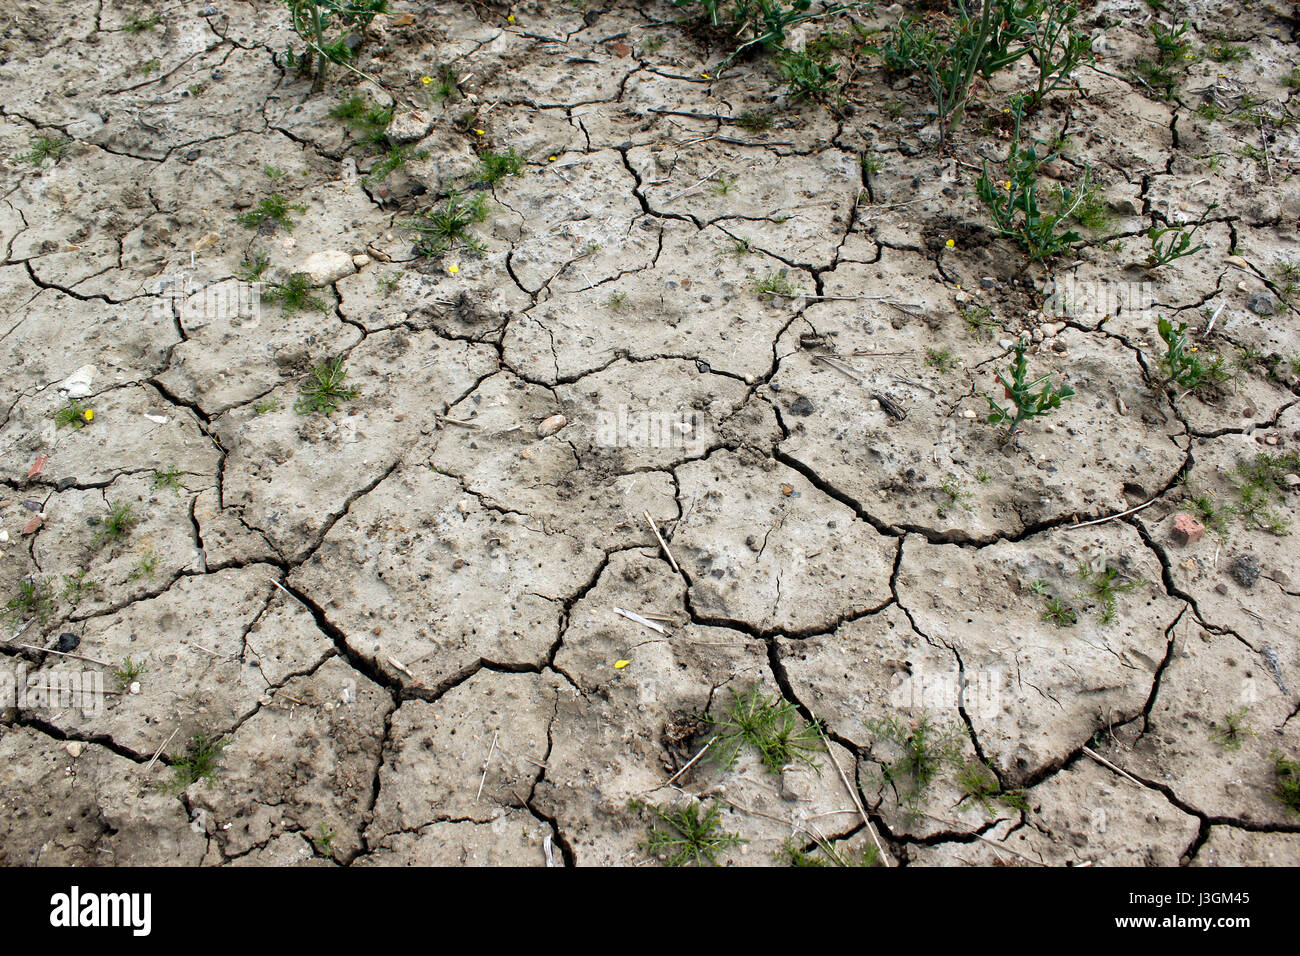 Drought dry cracked clay earth due to lack of rain Stock Photo